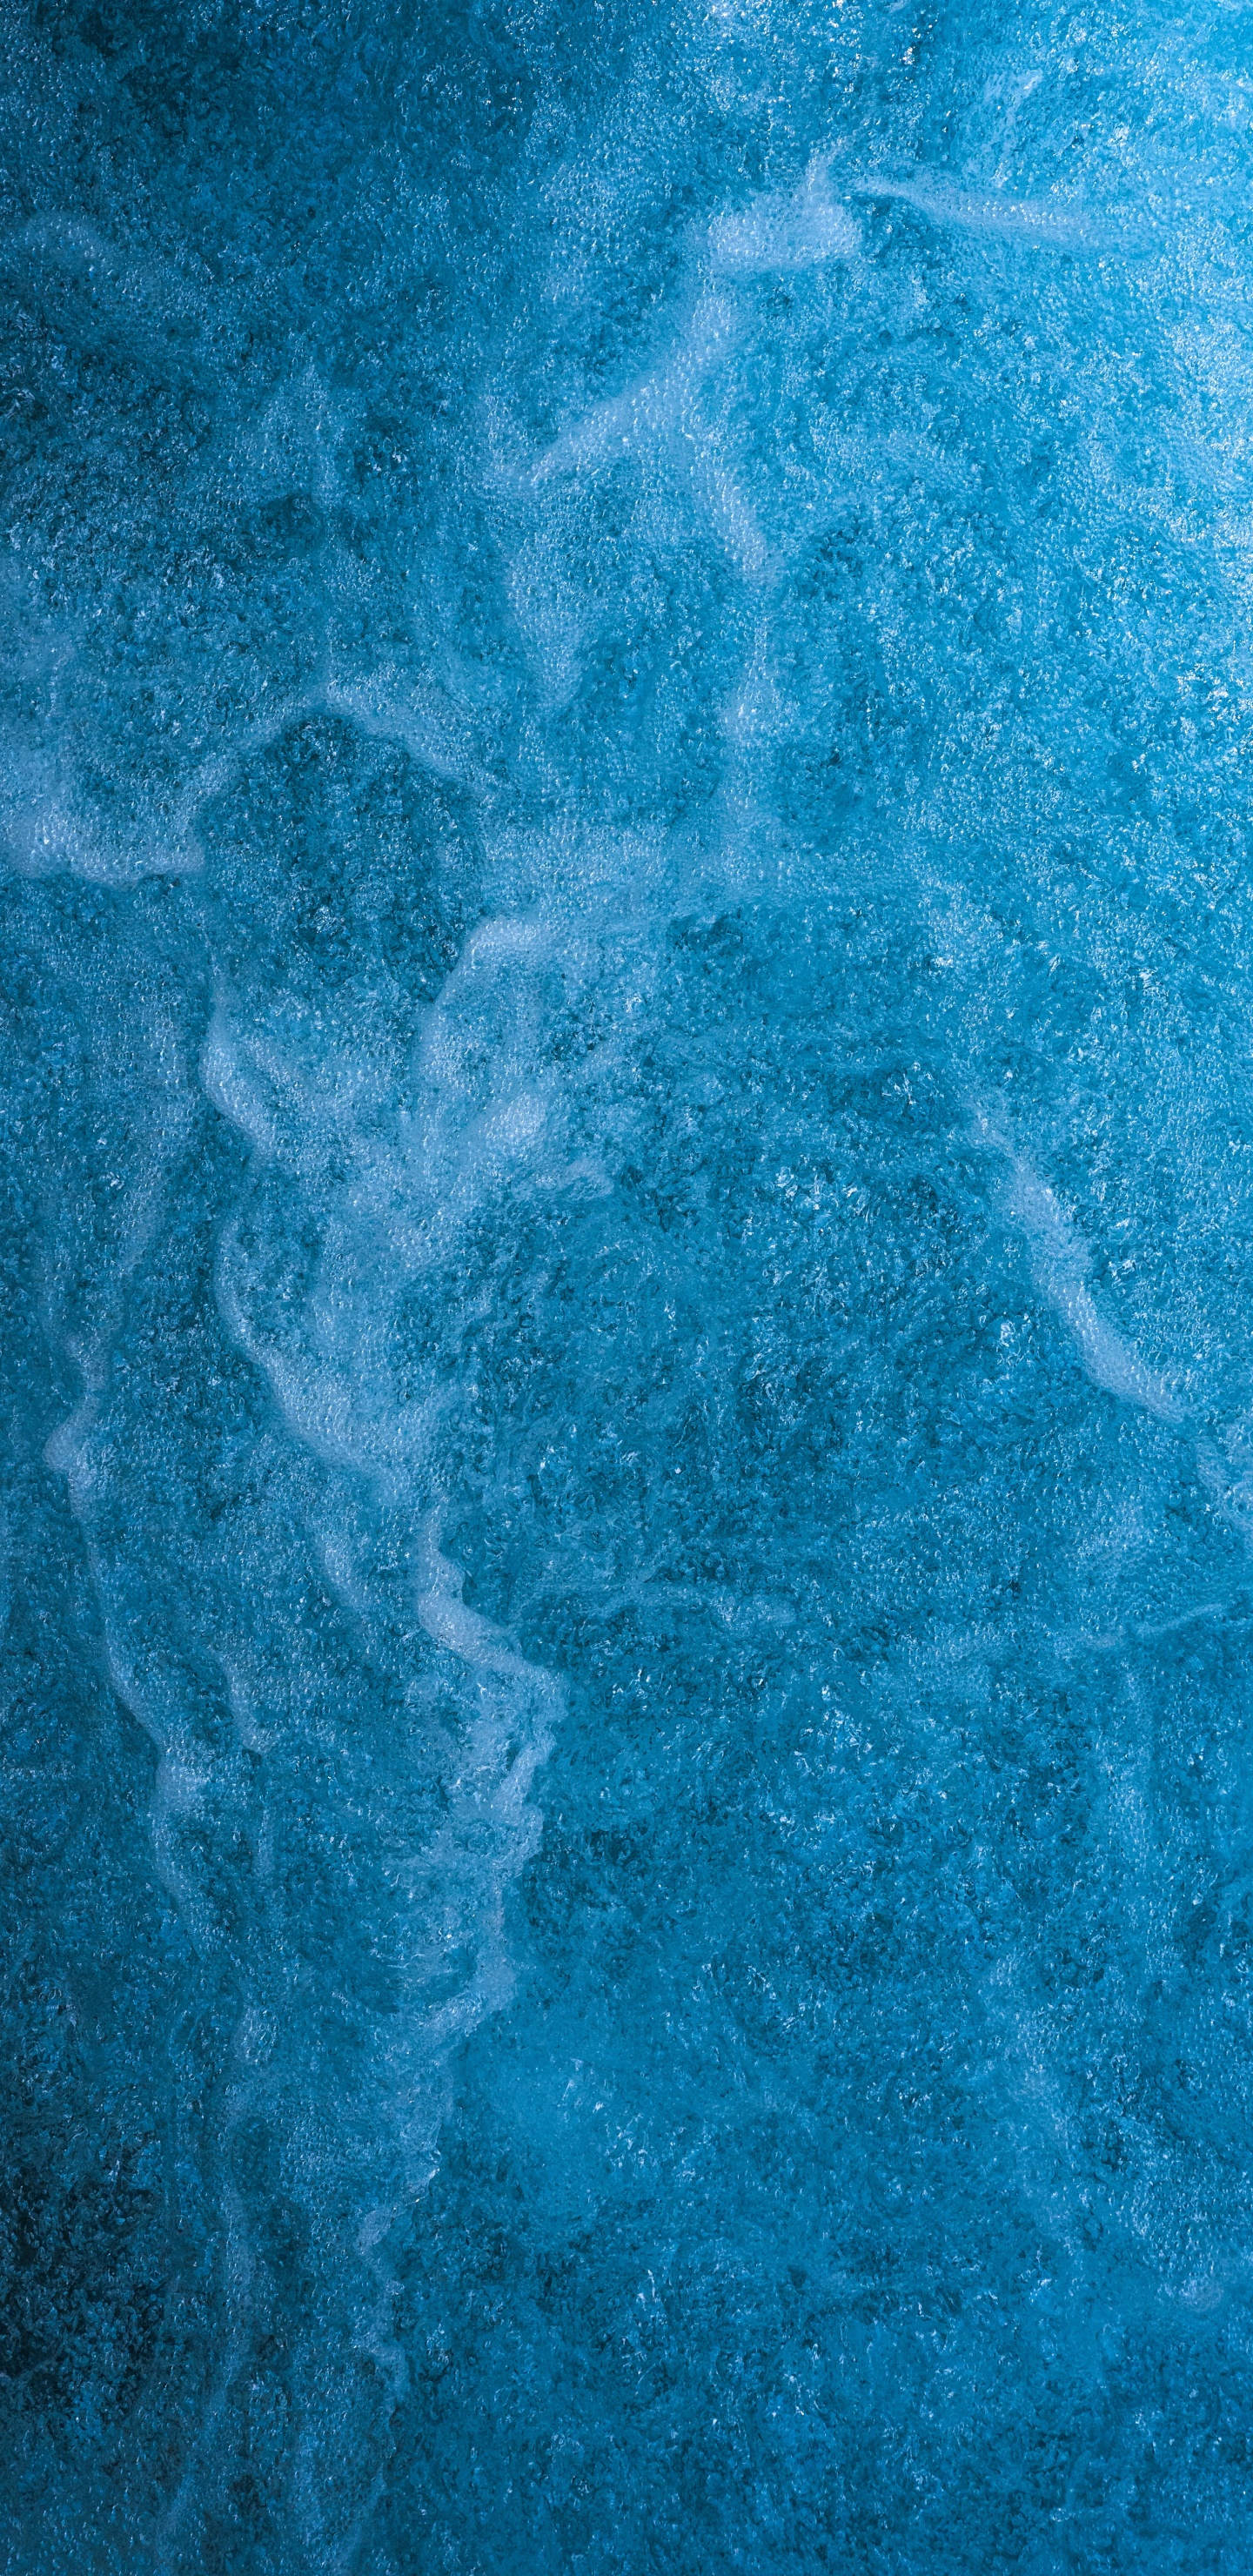 Texture, Water, Blue, Aqua, Turquoise. Wallpaper in 1440x2960 Resolution